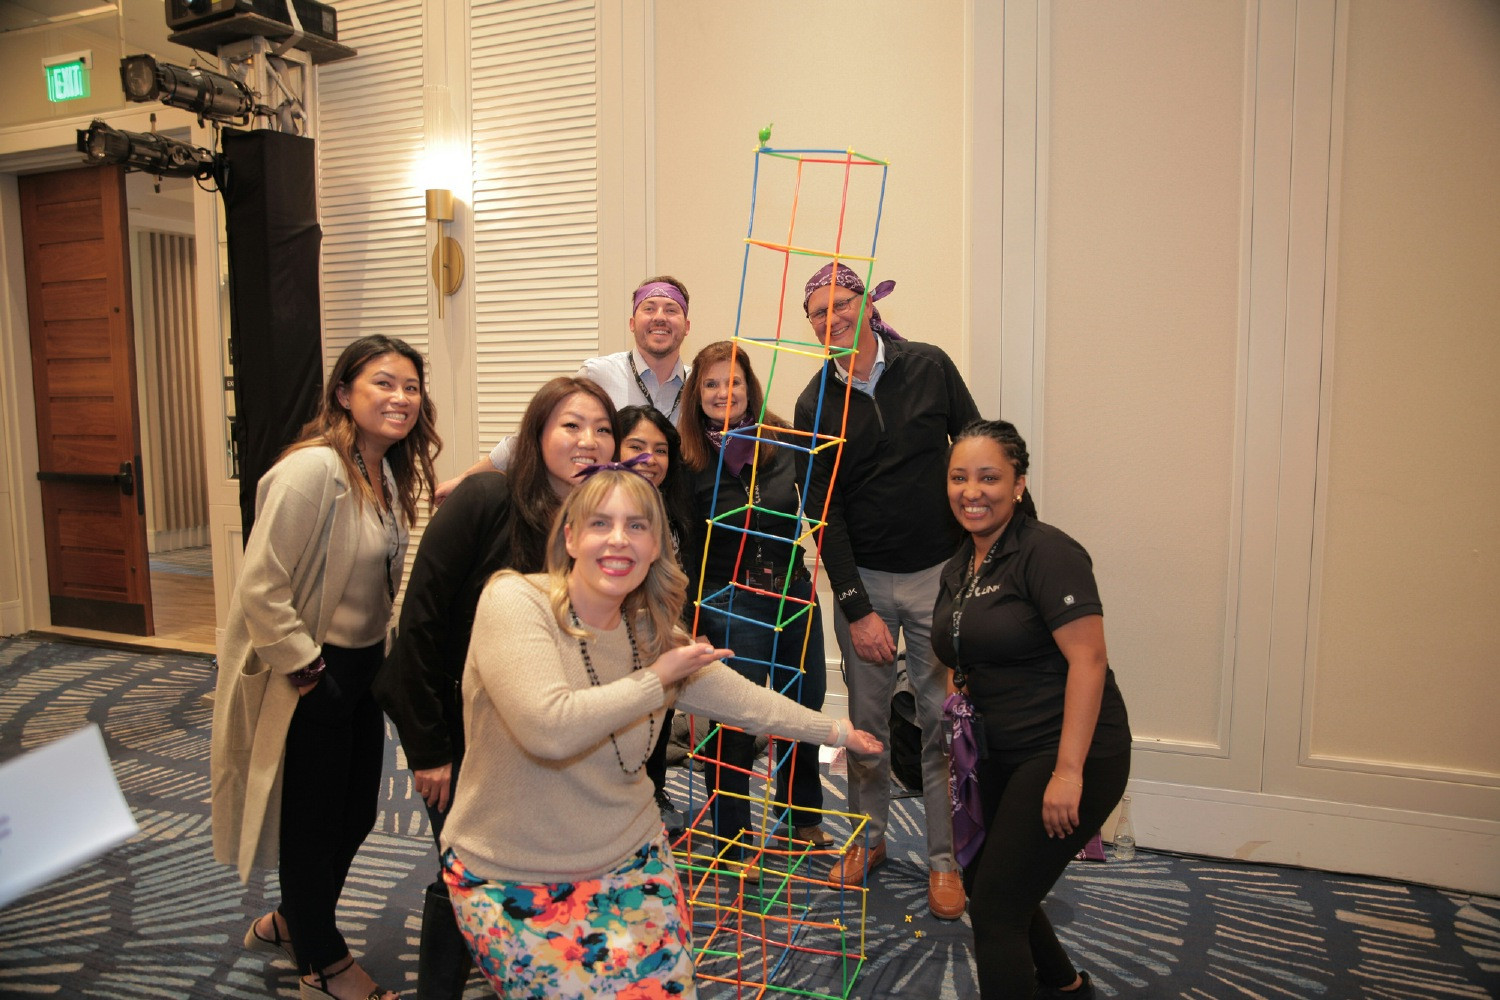 Team Event, bonding while building marshmallow and straw towers. 